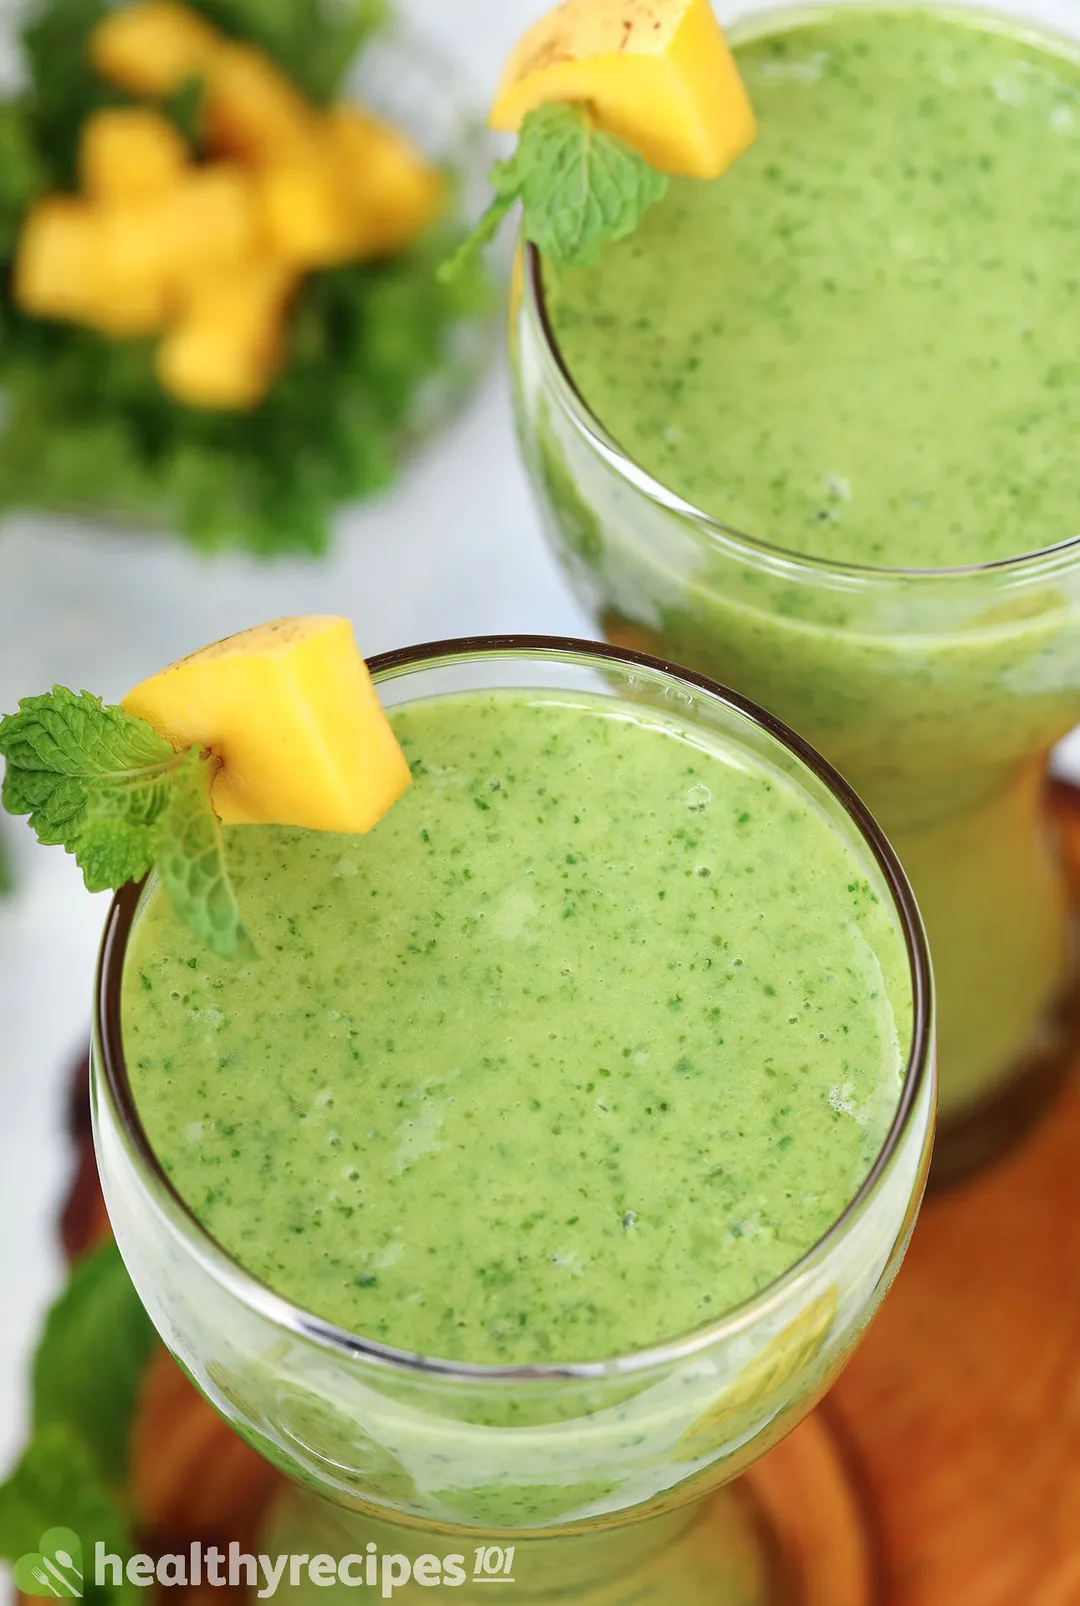 top view of two glasses of mango kale smoothie on a tray